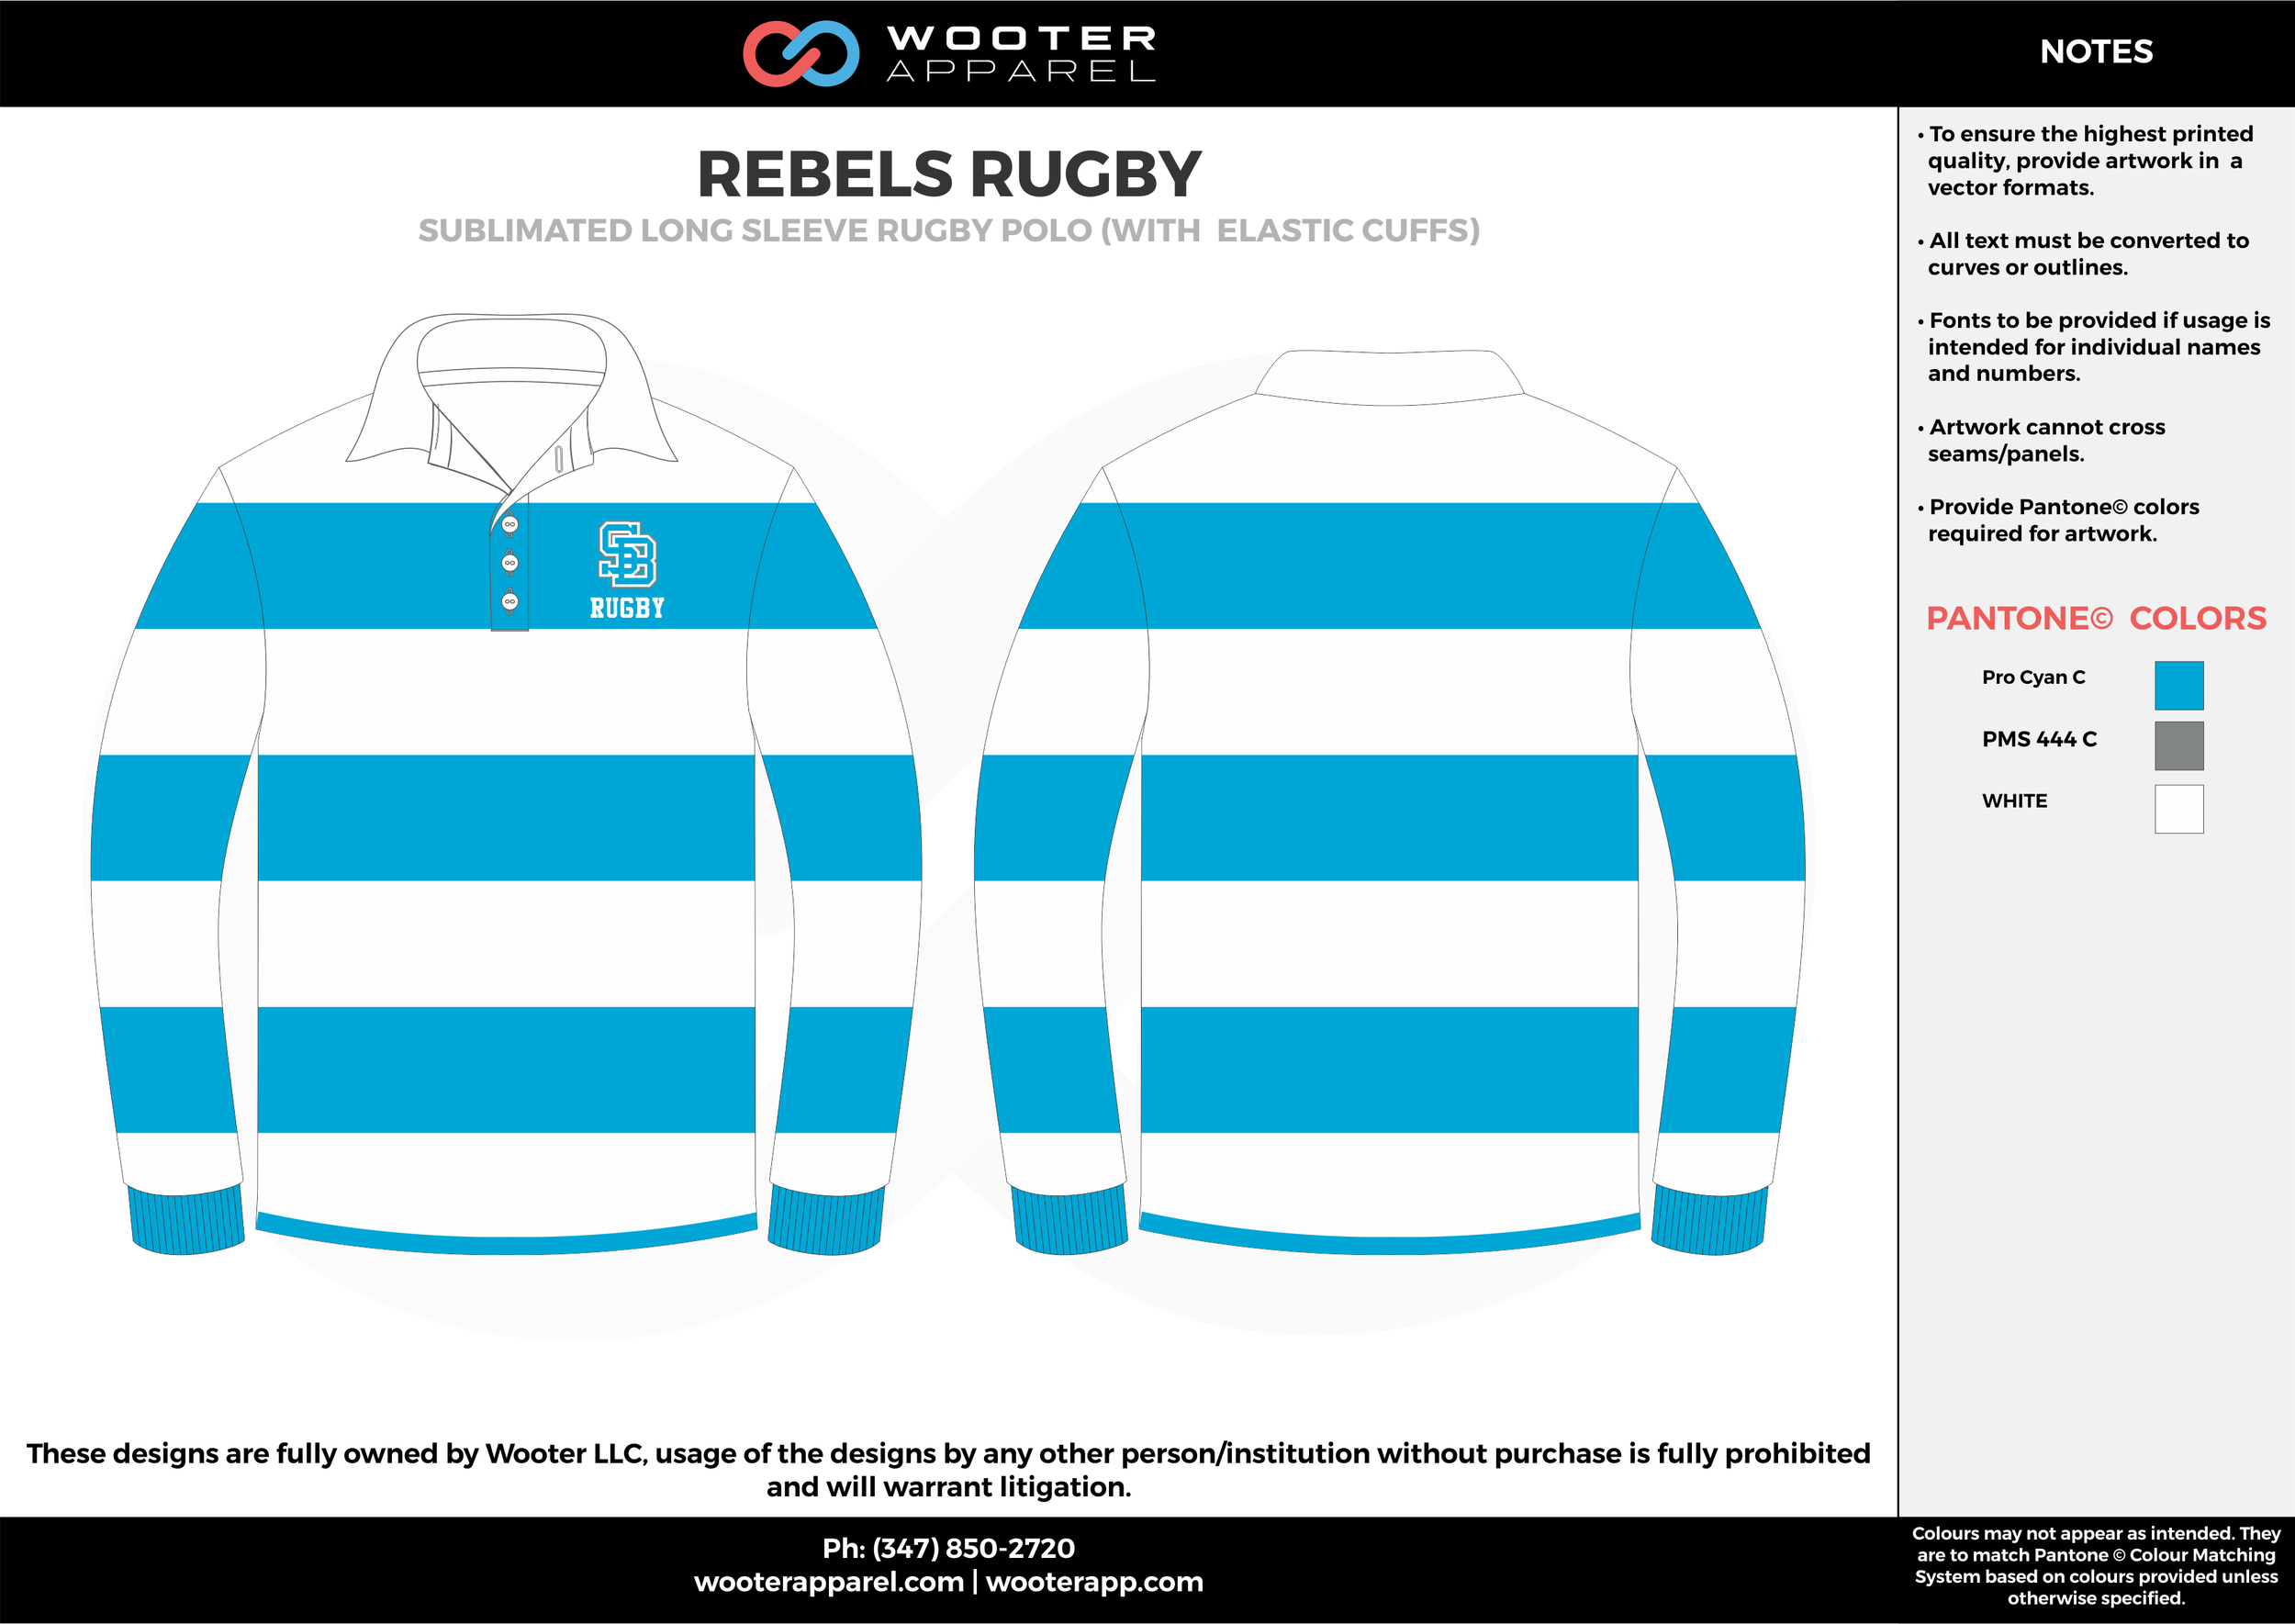 Rebels Rugby - Sublimated Long Sleeve Rugby Polo Shirt - 2017.png